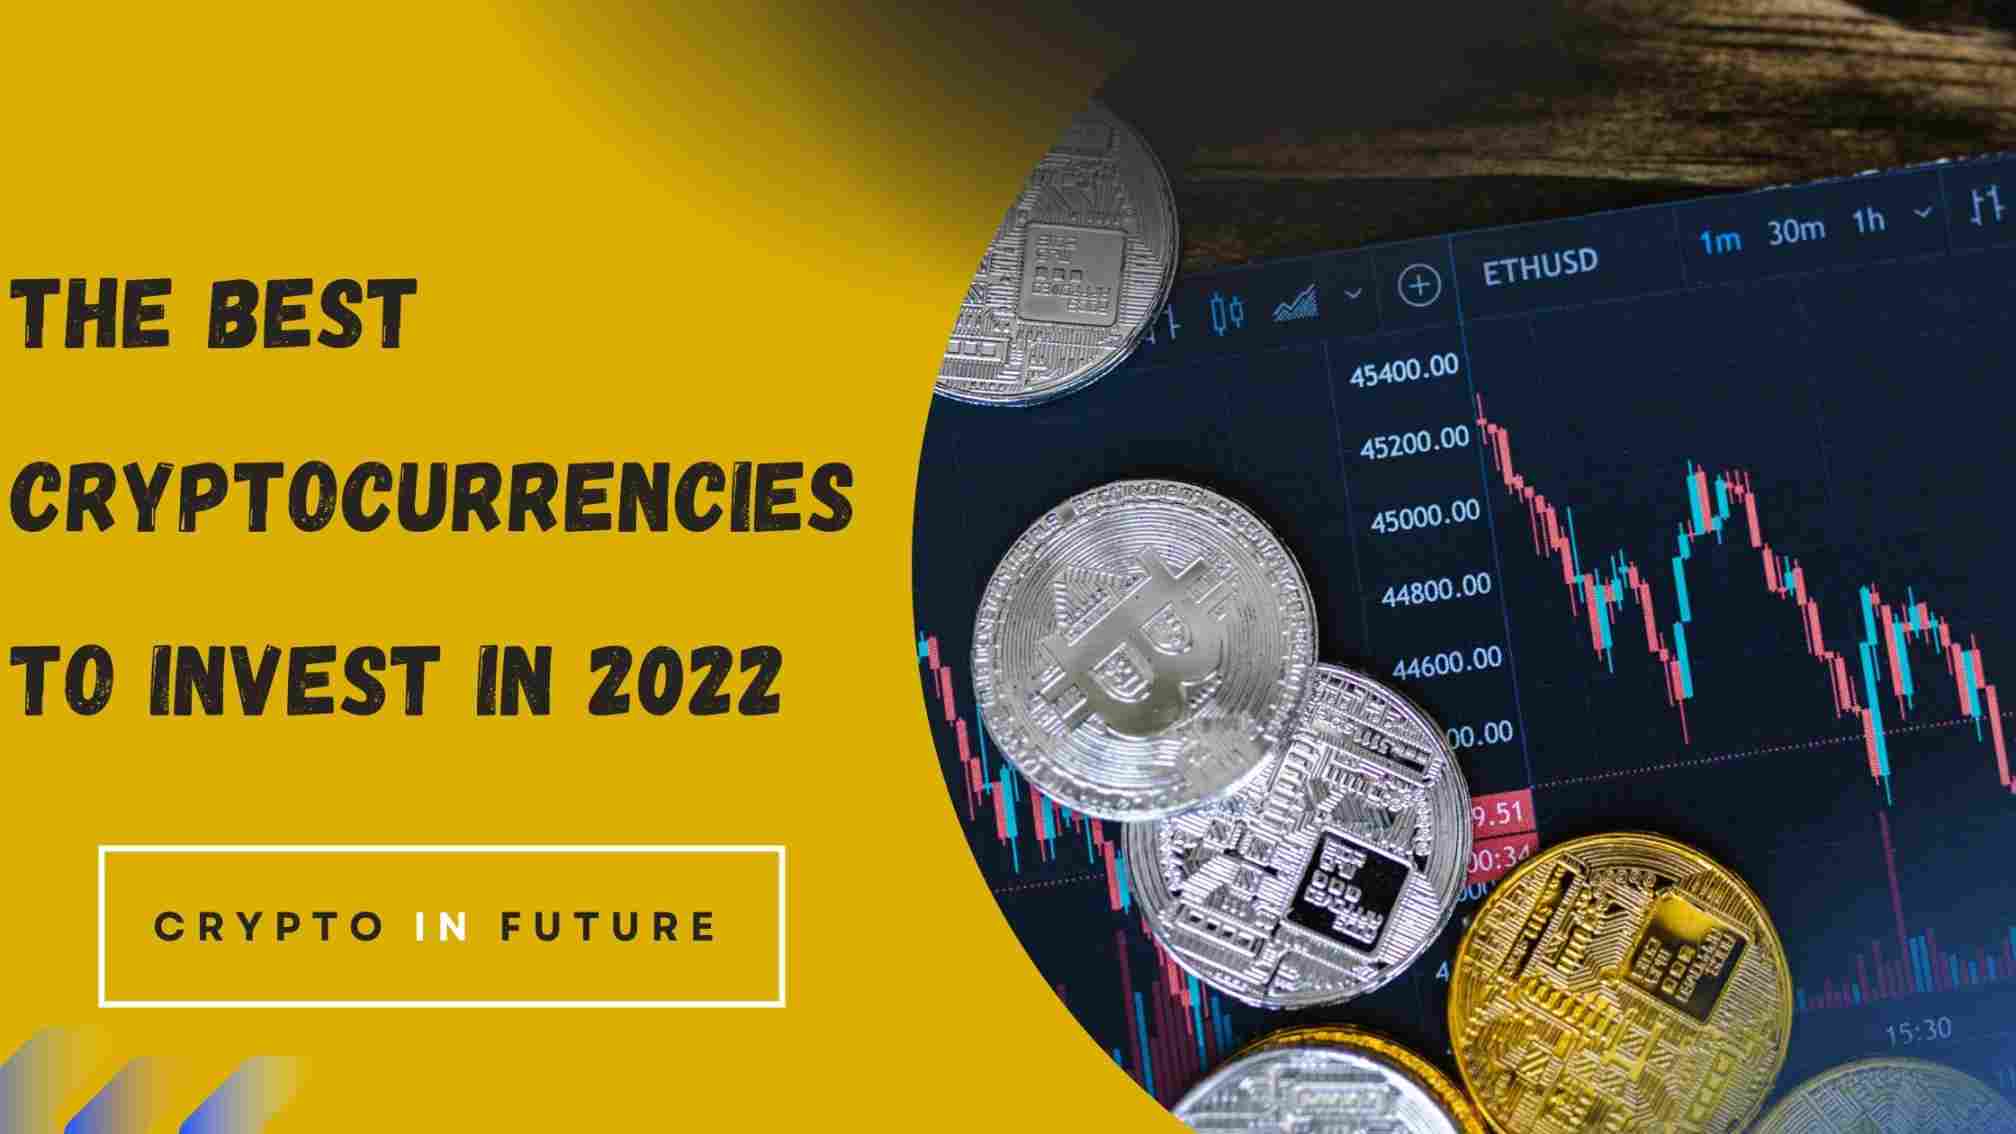 The Best Cryptocurrencies To Invest